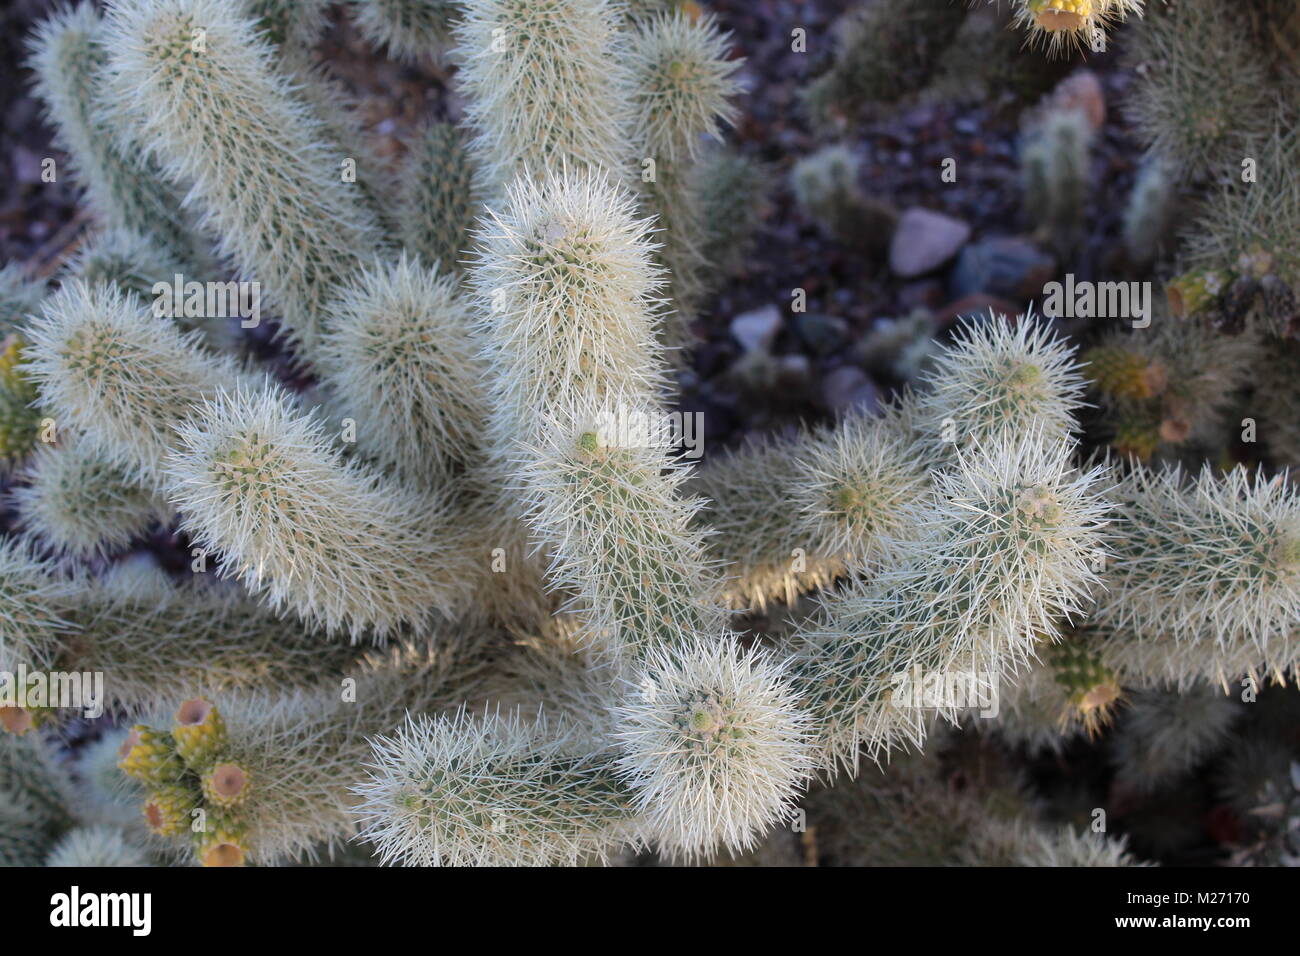 Cactus Arizona USA fuzzy looking spinney long stemmed cactus with small flowers a close up picture Stock Photo